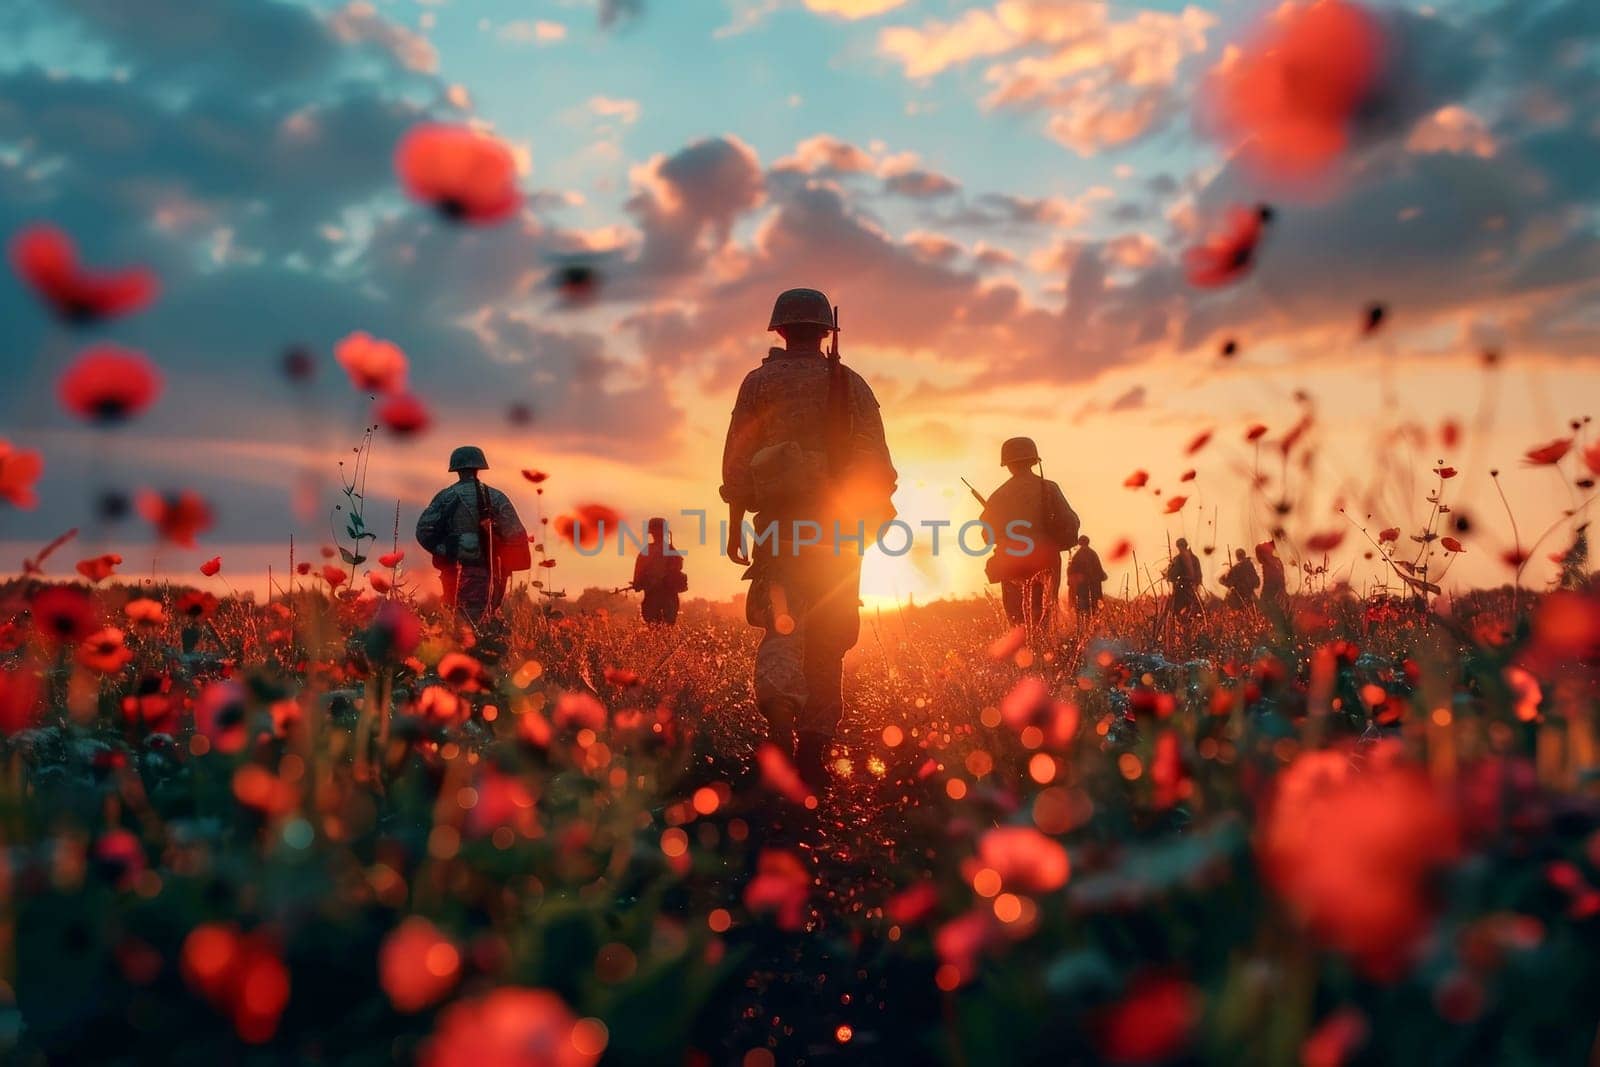 memorial day concept. A group of soldiers walking through a field of red poppies.